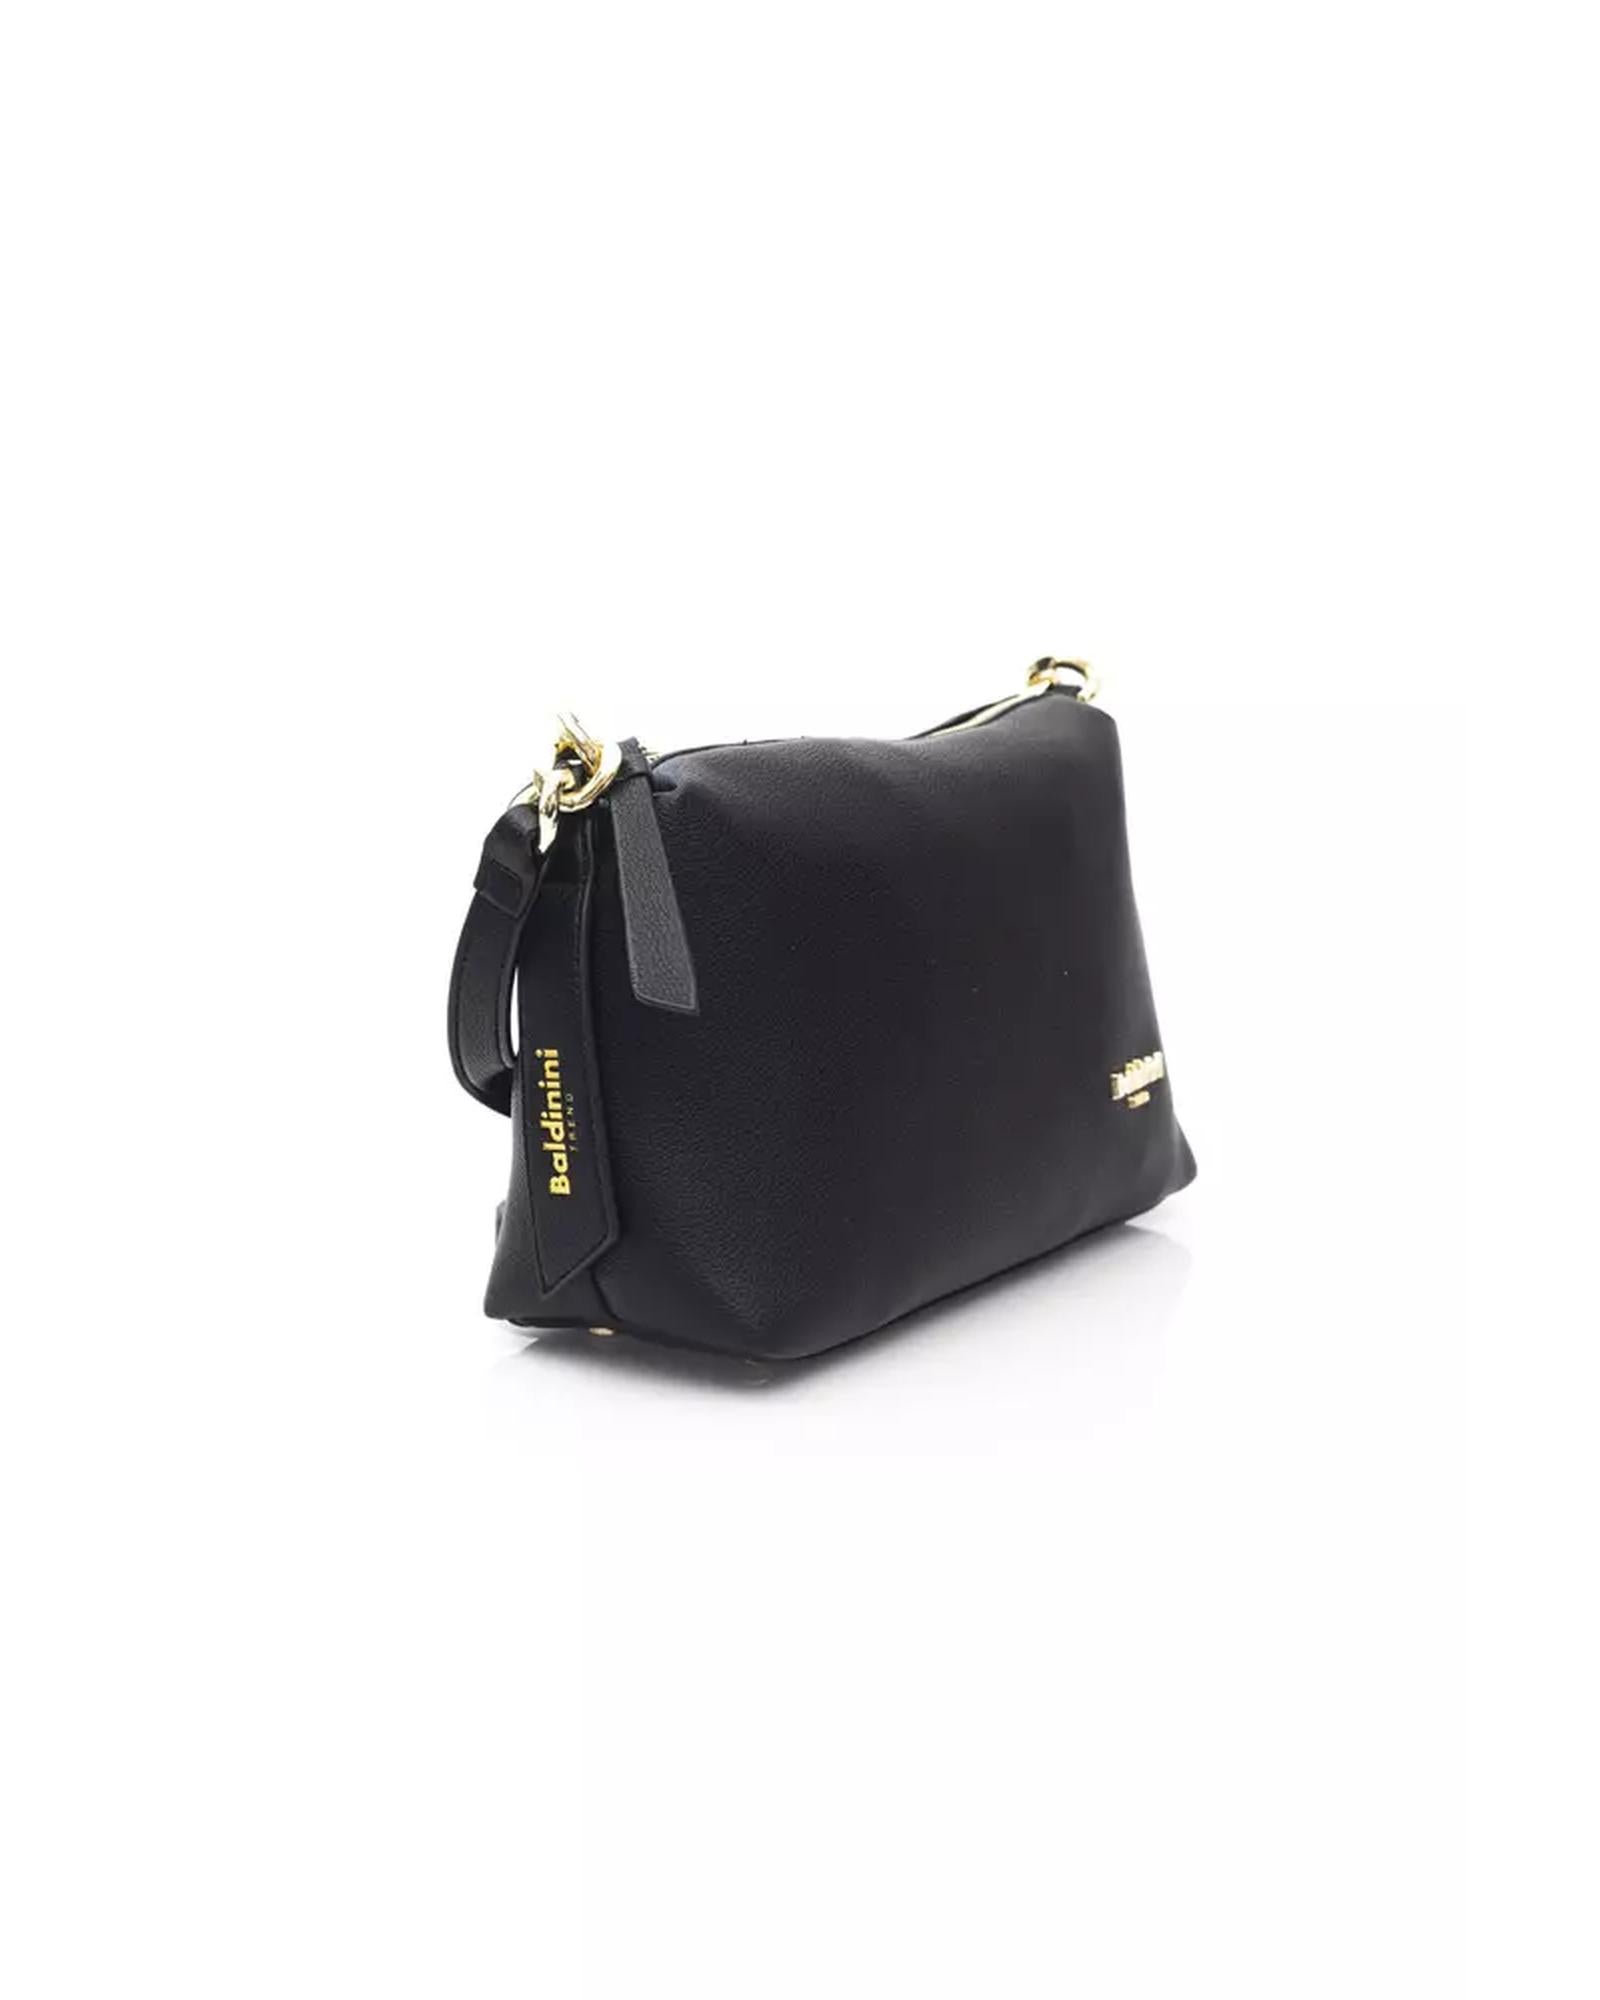 Golden Logo Shoulder Bag with Zip Closure and Internal Compartments One Size Women